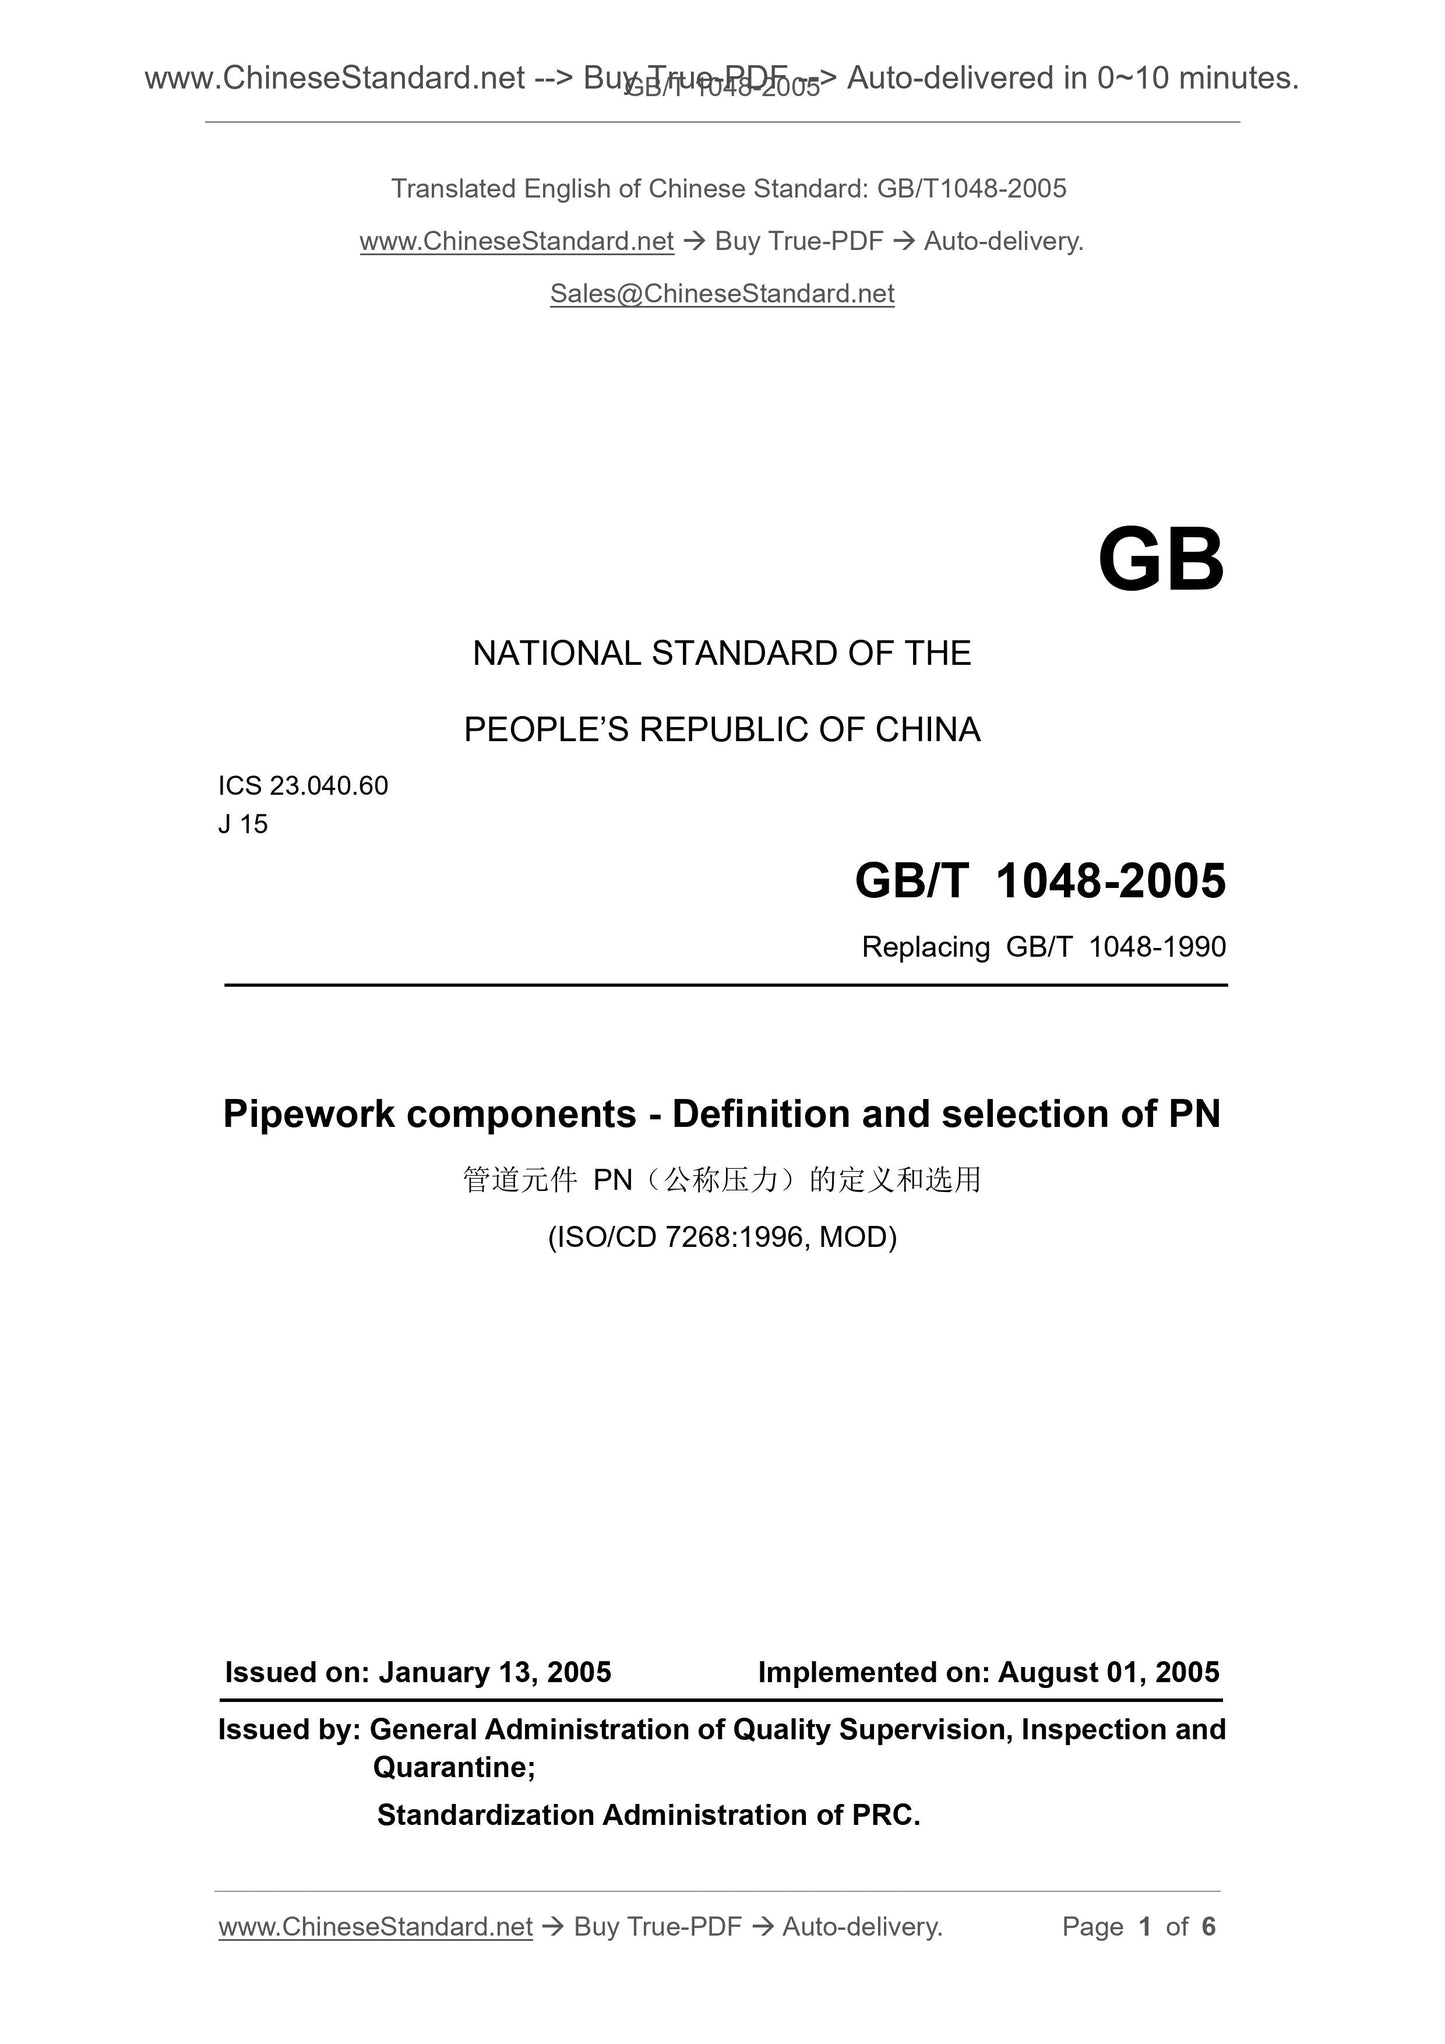 GB/T 1048-2005 Page 1